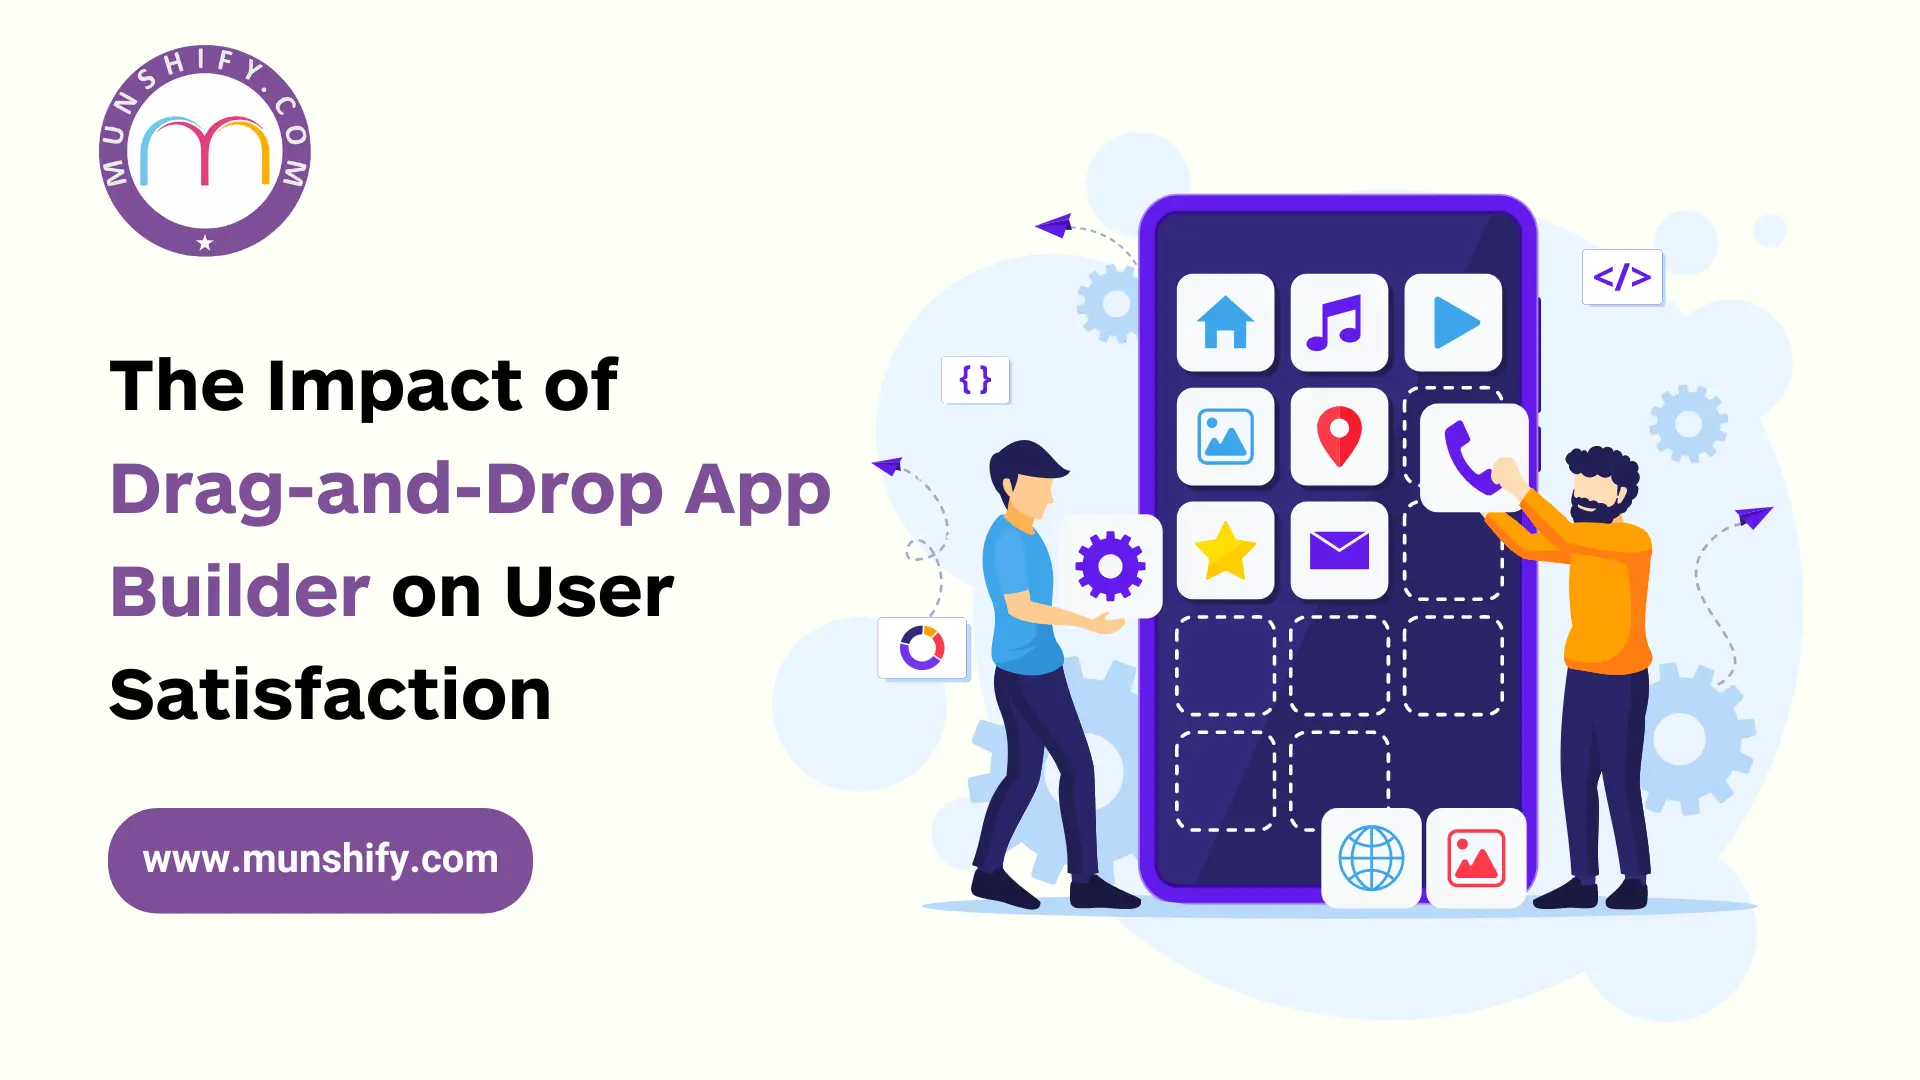 Impact of Drag-and-Drop App Builder on User Satisfaction.